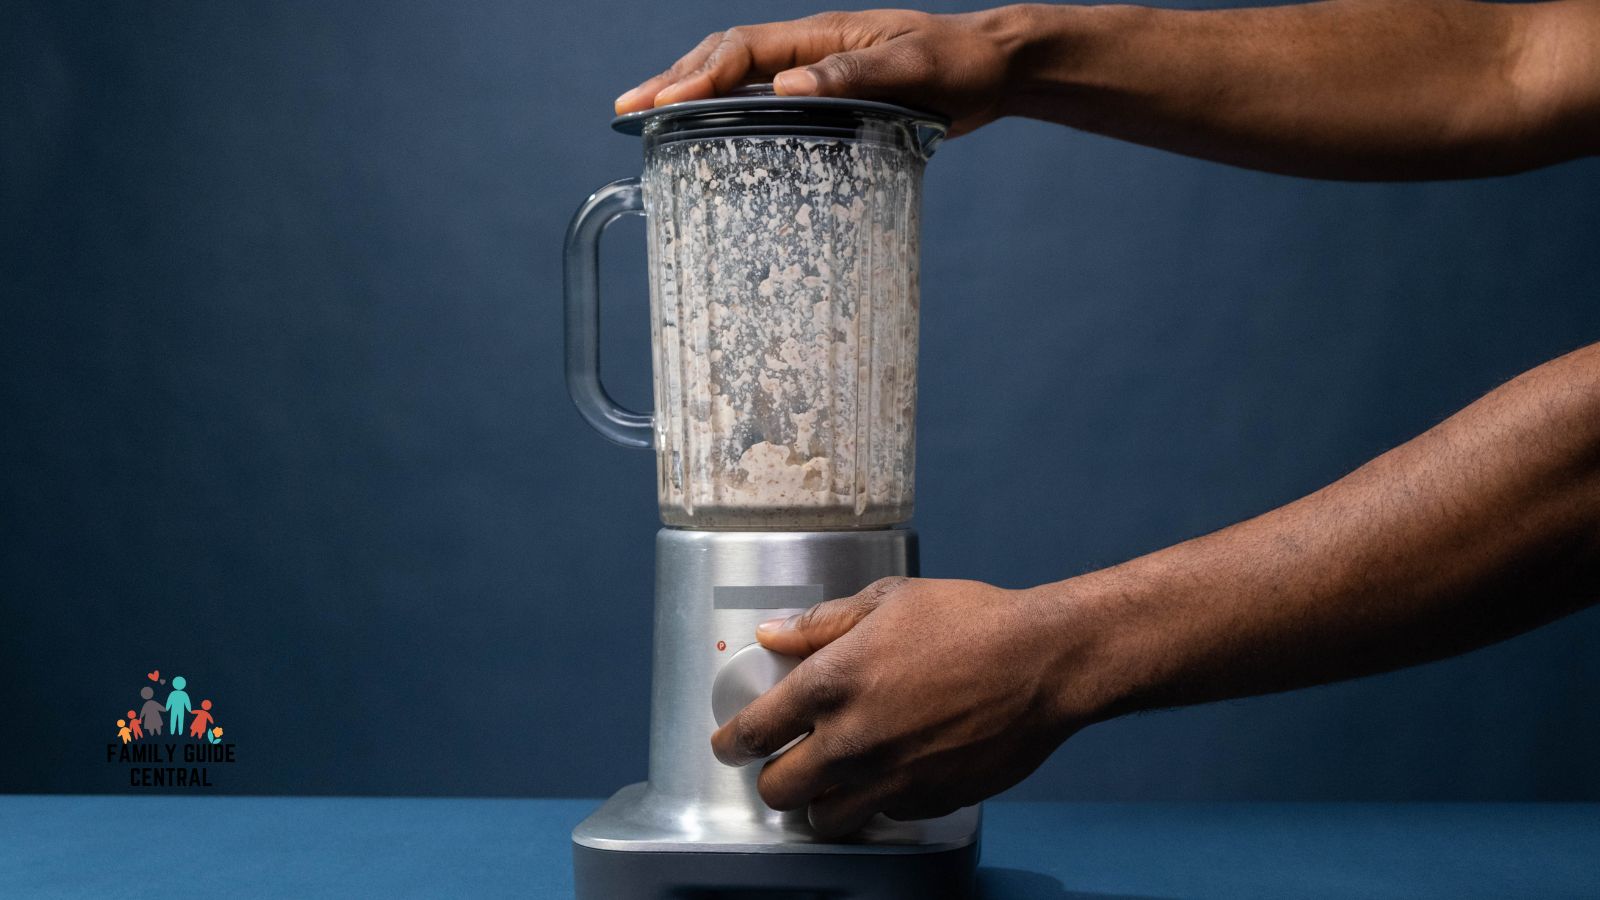 Dirty blender with hands holding top and dial - familyguidecentral.com